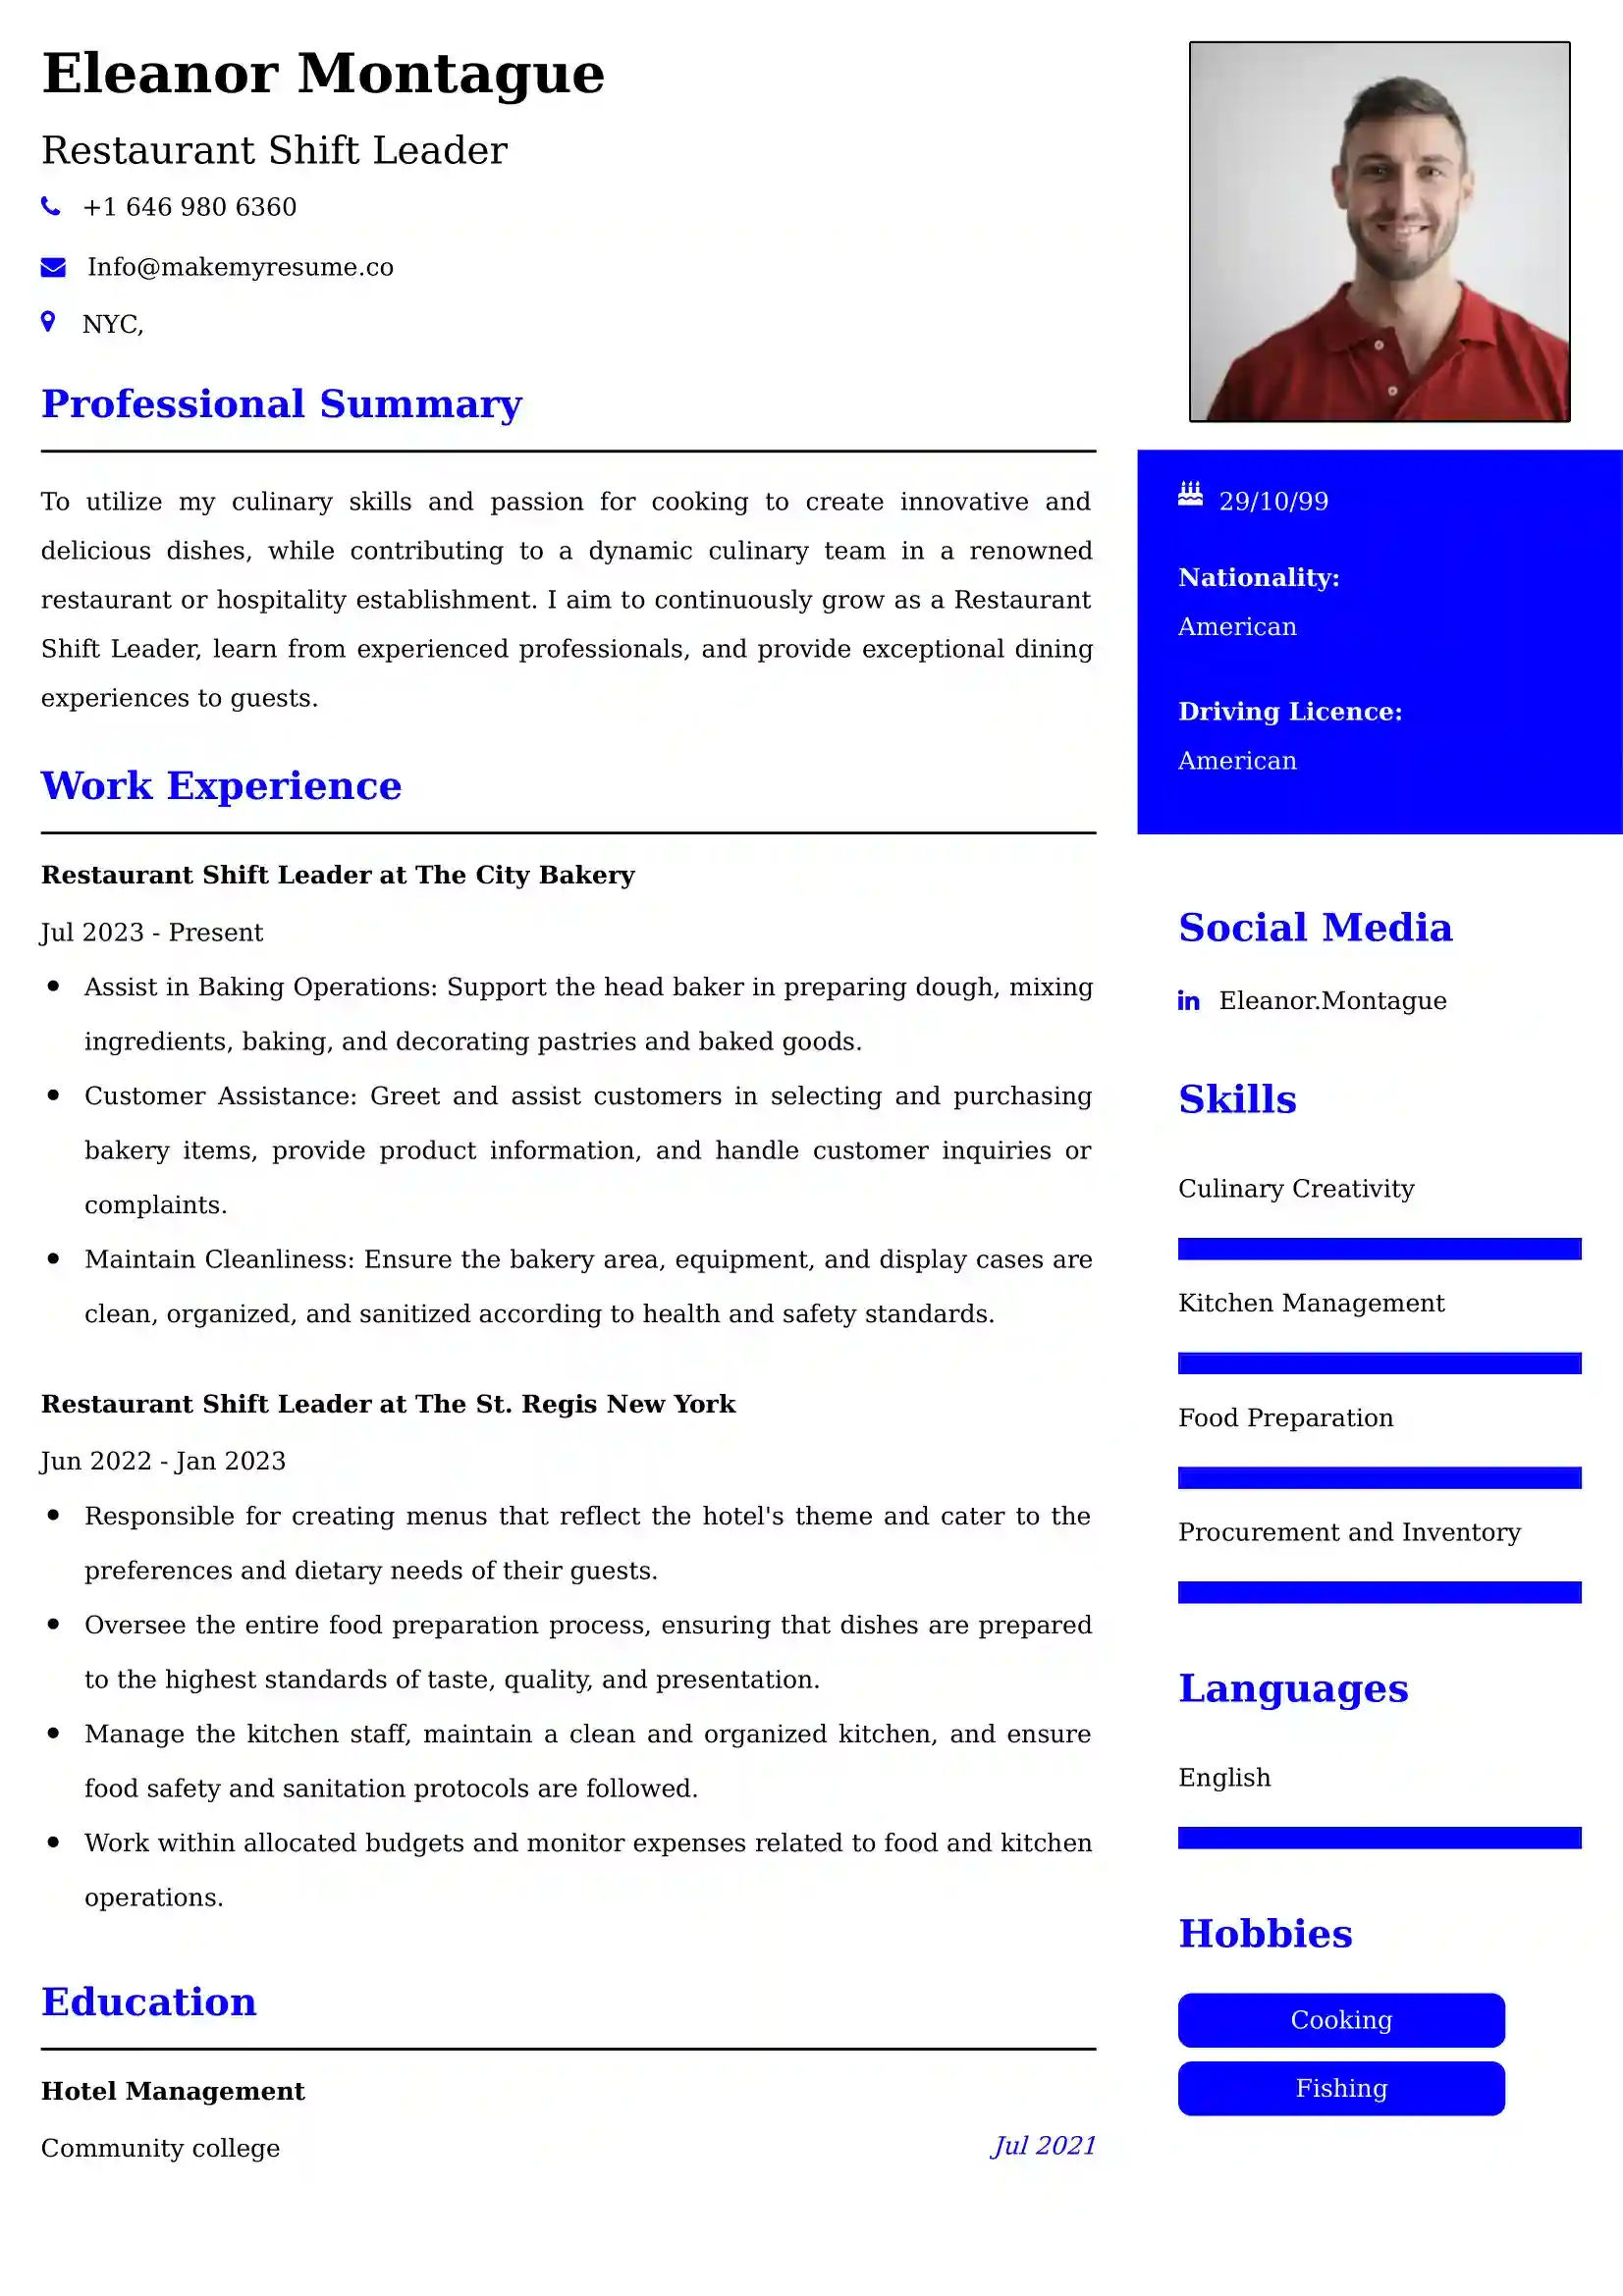 Restaurant Shift Leader Resume Examples for UK Jobs - Tips and Guide